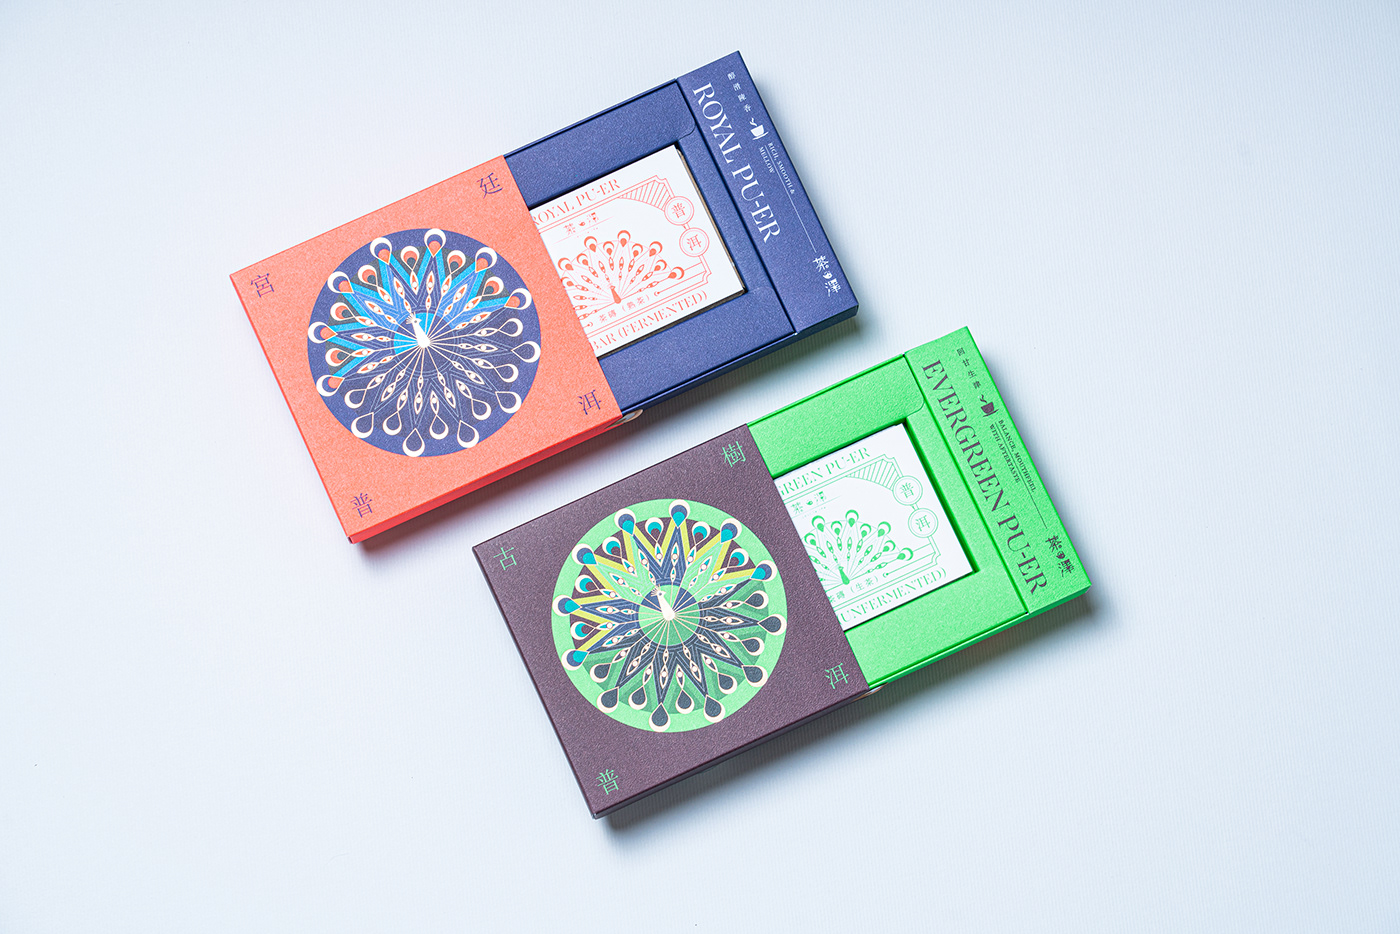 chinese Chinese Tea Colourful  graphic design  Noble package peacock premium tea Tea Package